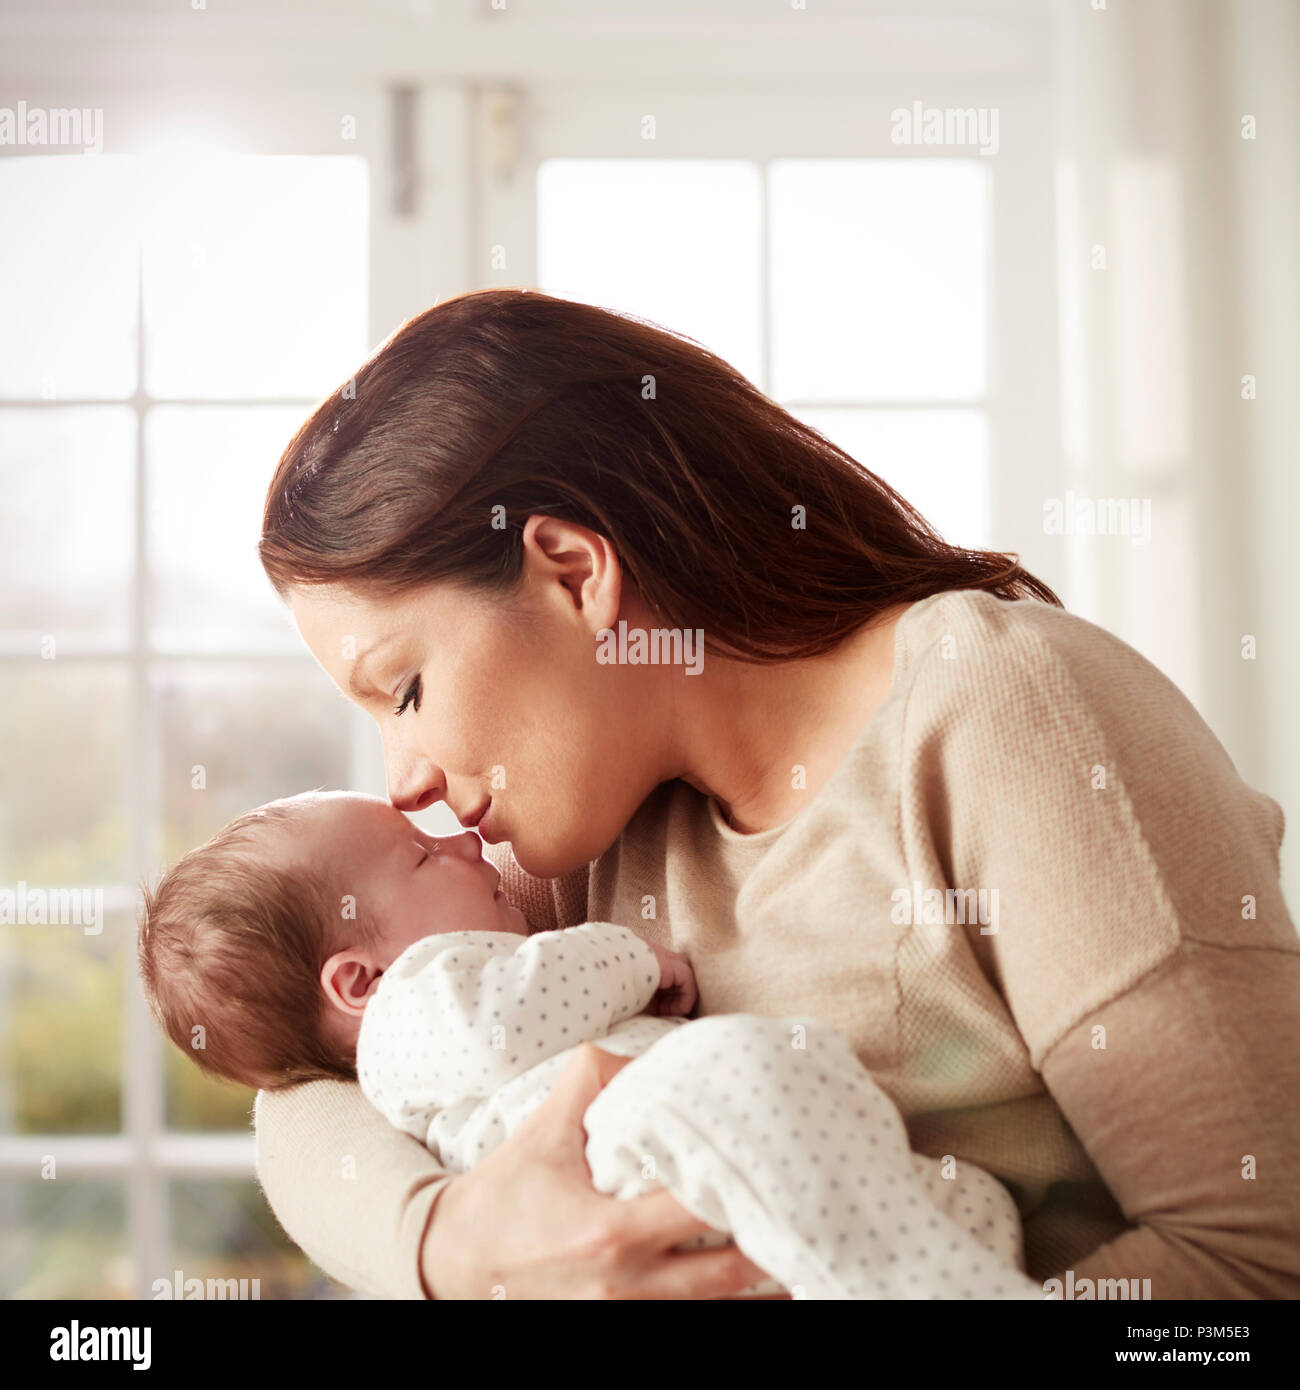 Loving Mother Kissing And Cuddling Newborn Baby At Home Stock Photo